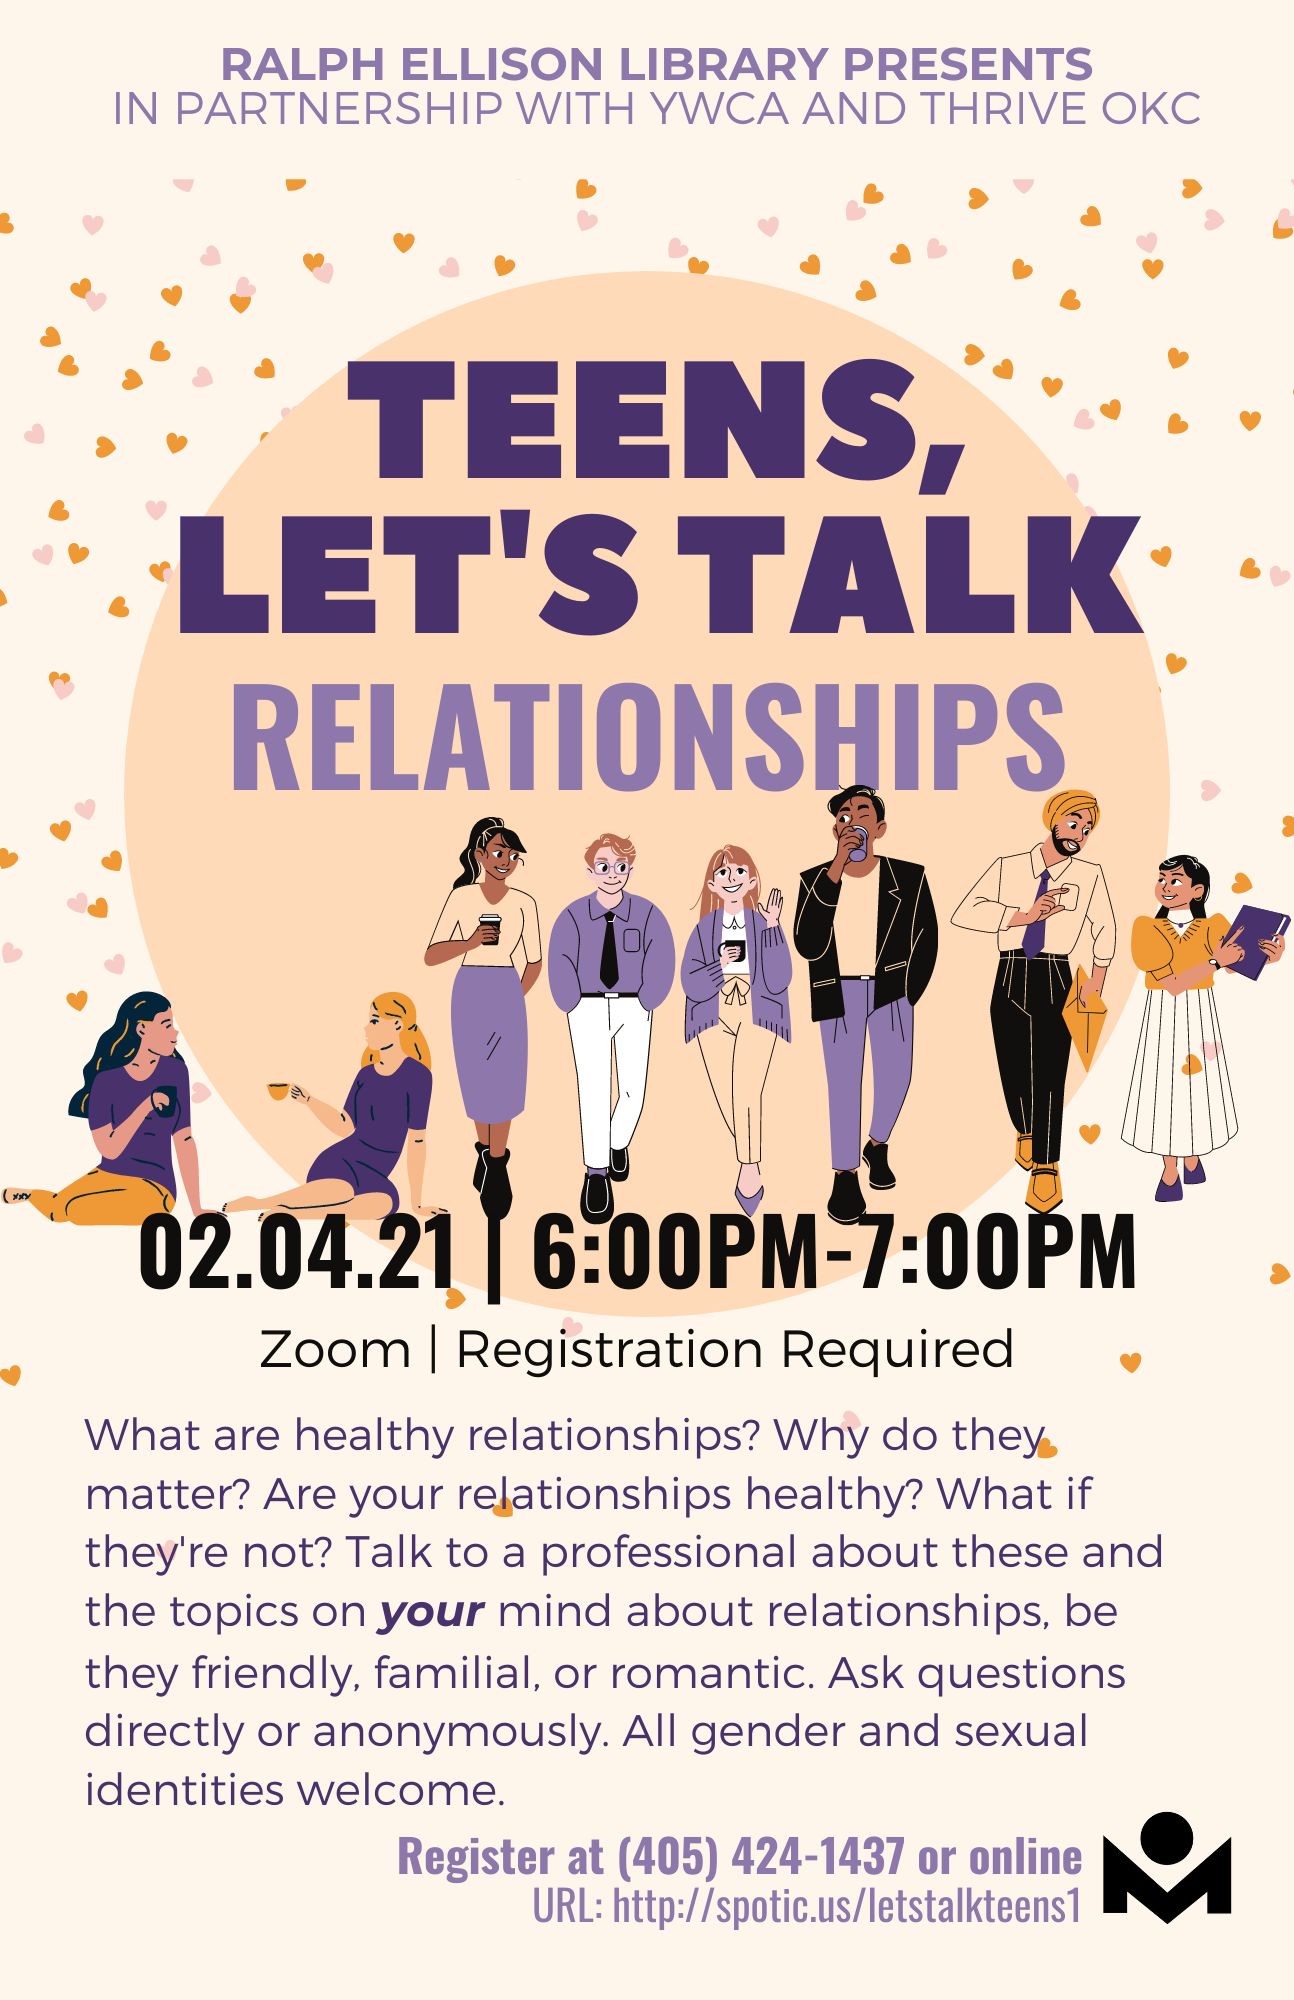 This is a promotional image for the Teens, Let's Talk Relationships program.